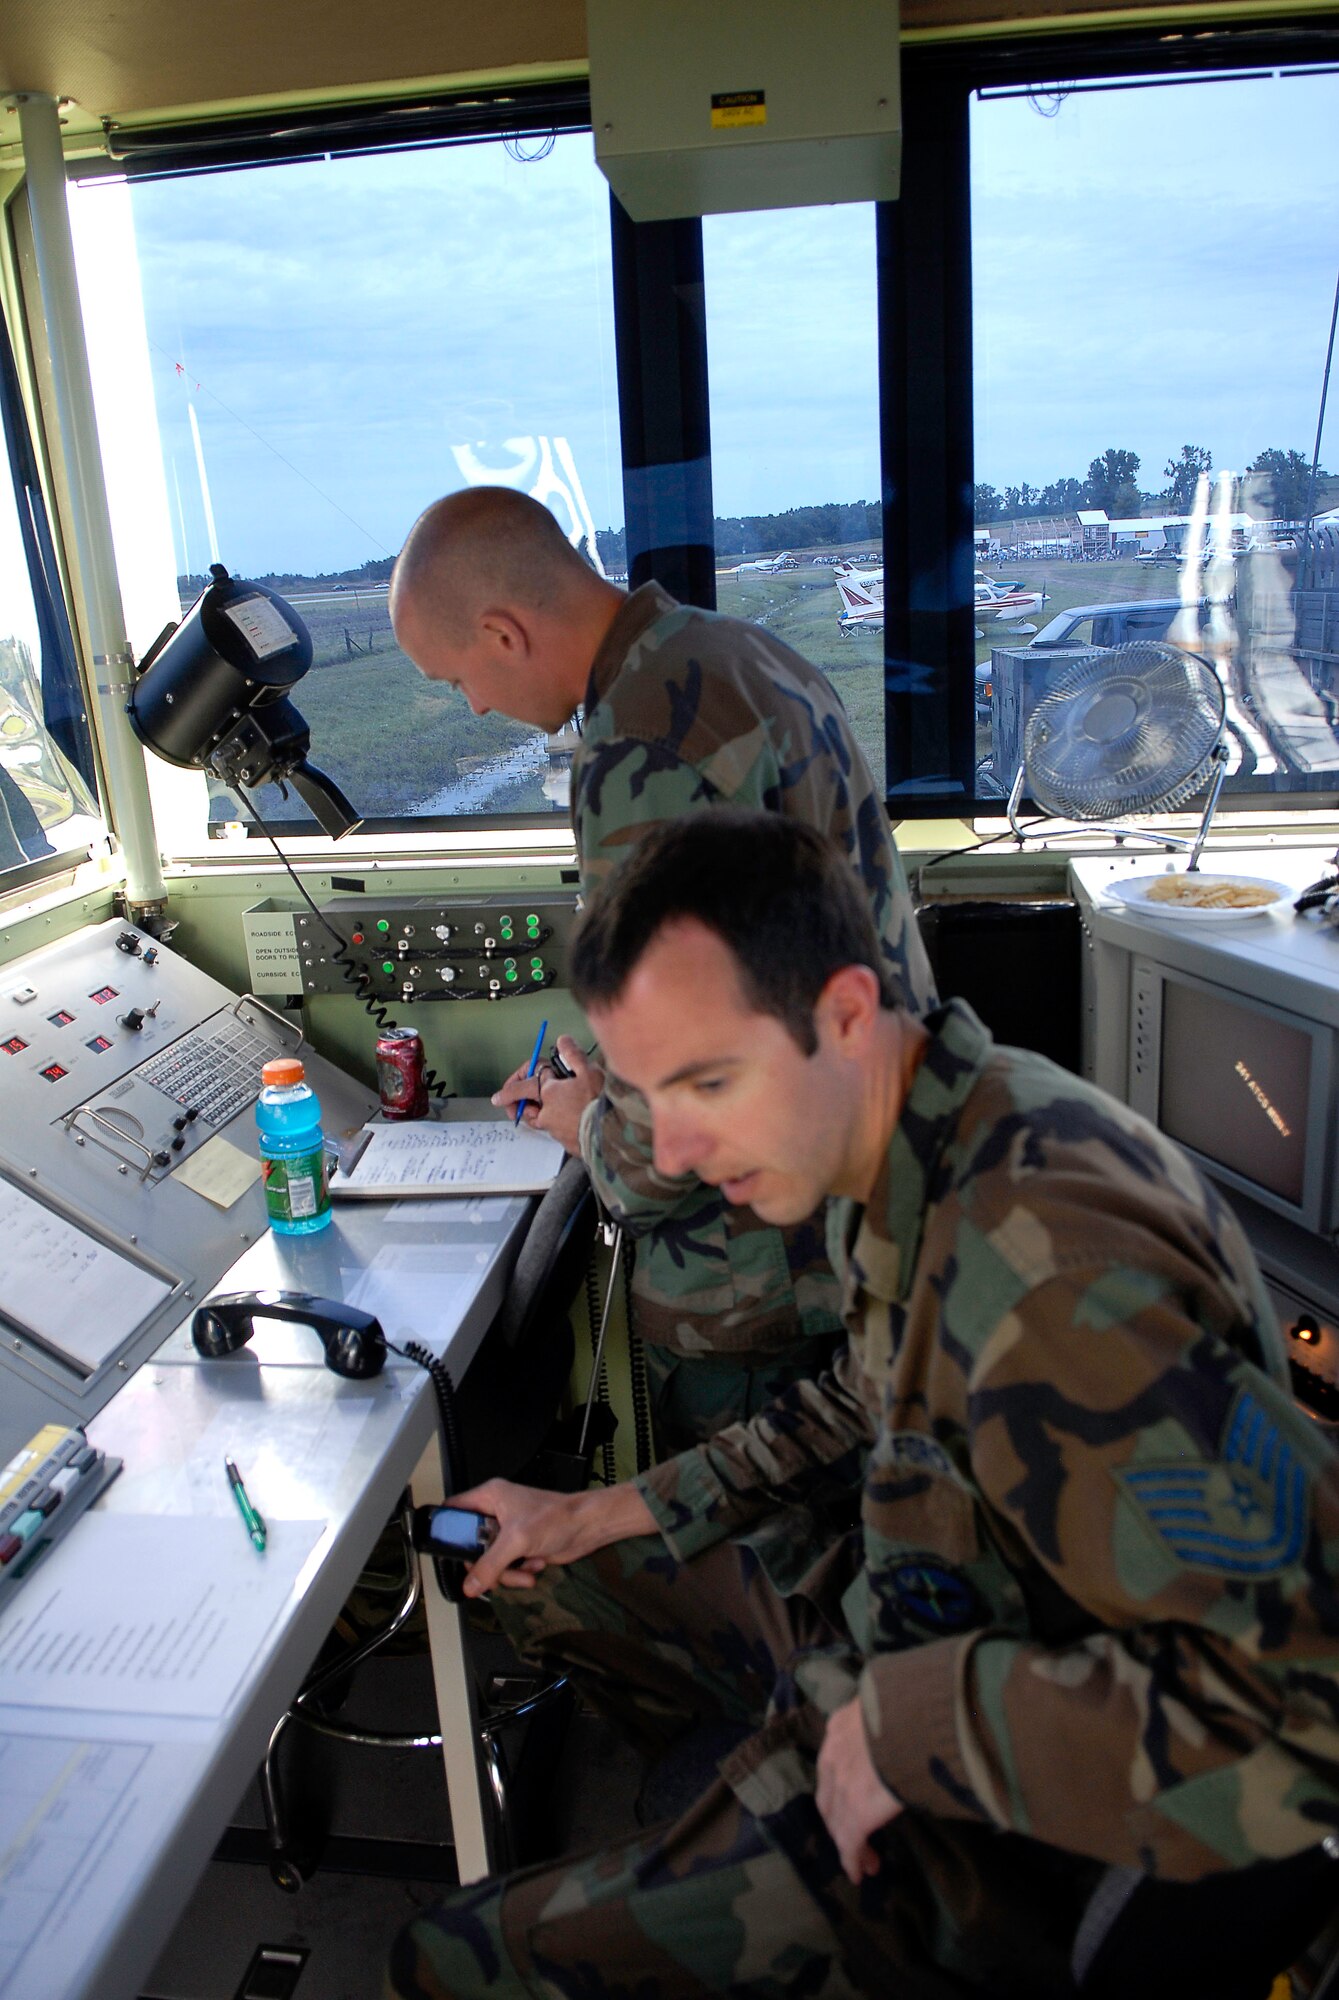 Technical Sergeants Isacc Steed, left and Scott Thompson, right, both Missouri Air National Guard members from the 241st Air Traffic Control Squadron in Saint Joseph, provide air traffic management at the  Tarkio Fly-in on July 12, 2008. (U.S. Air Force photo by Master Sgt. Greg Kunkle/Released)
